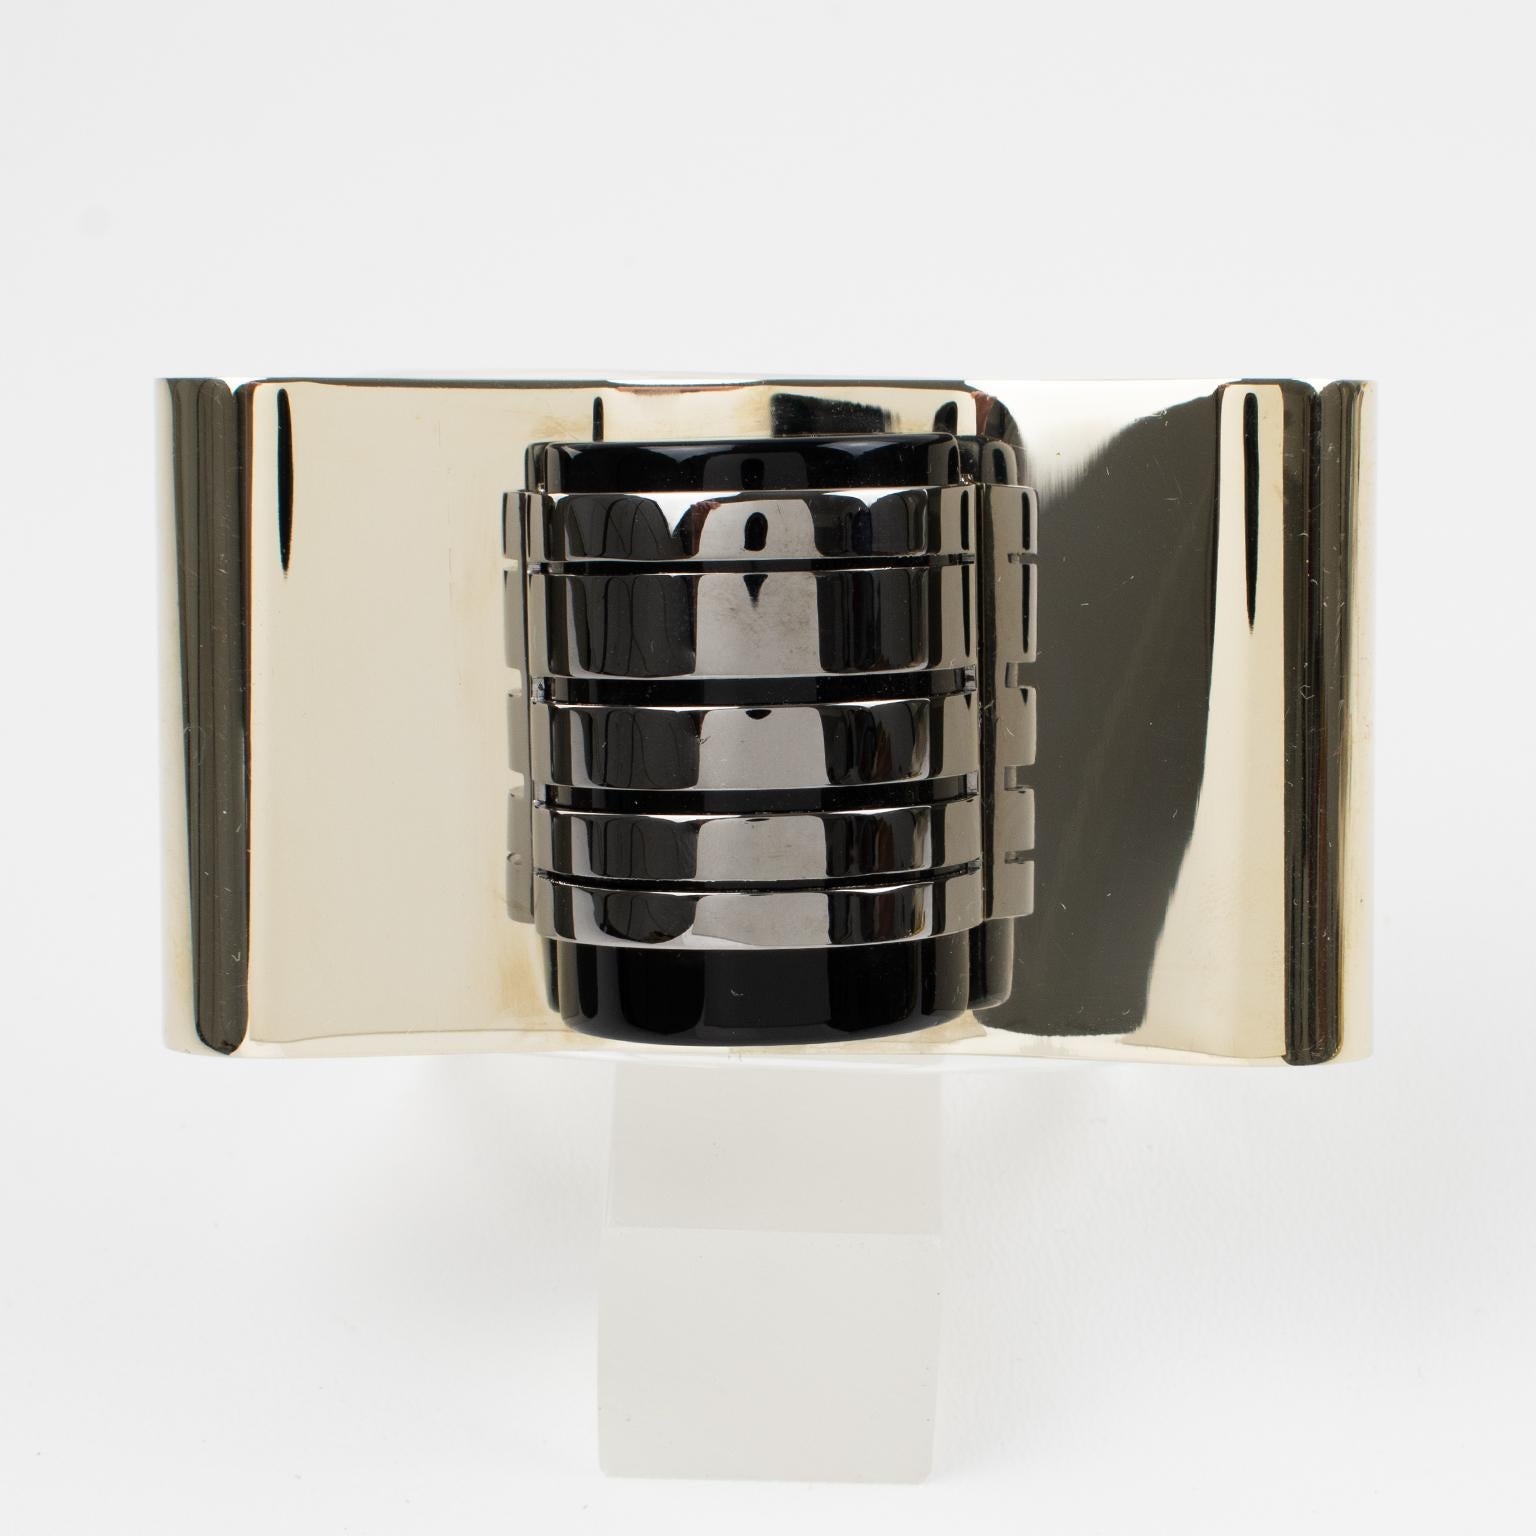 Gianfranco Ferre Art Deco Inspired Lucite and Metal Cuff Bracelet For Sale 7